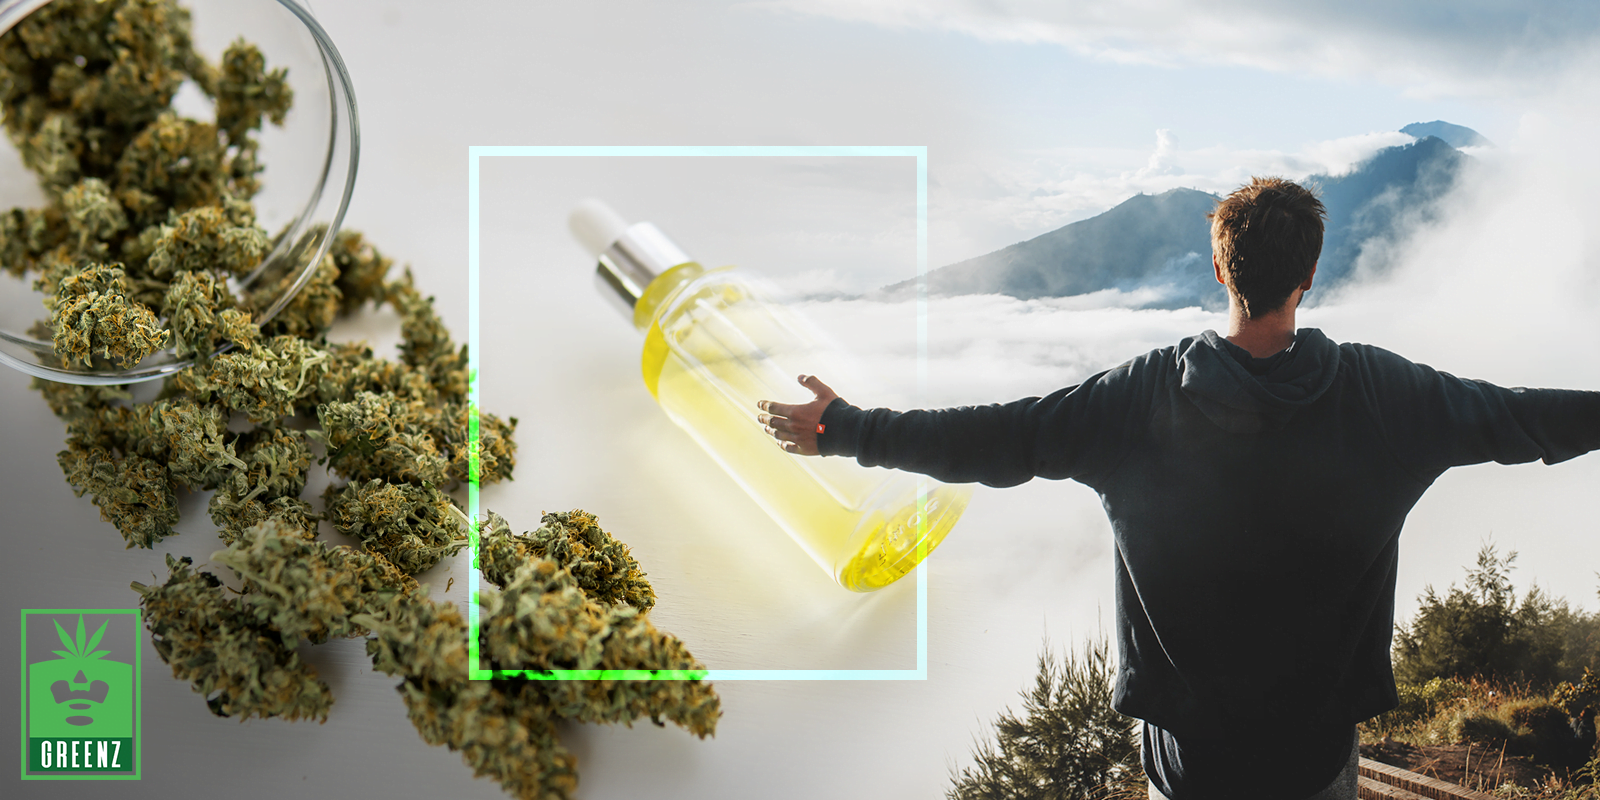 Cbd & Thc – The Cannabinoid Difference & All About Ratios